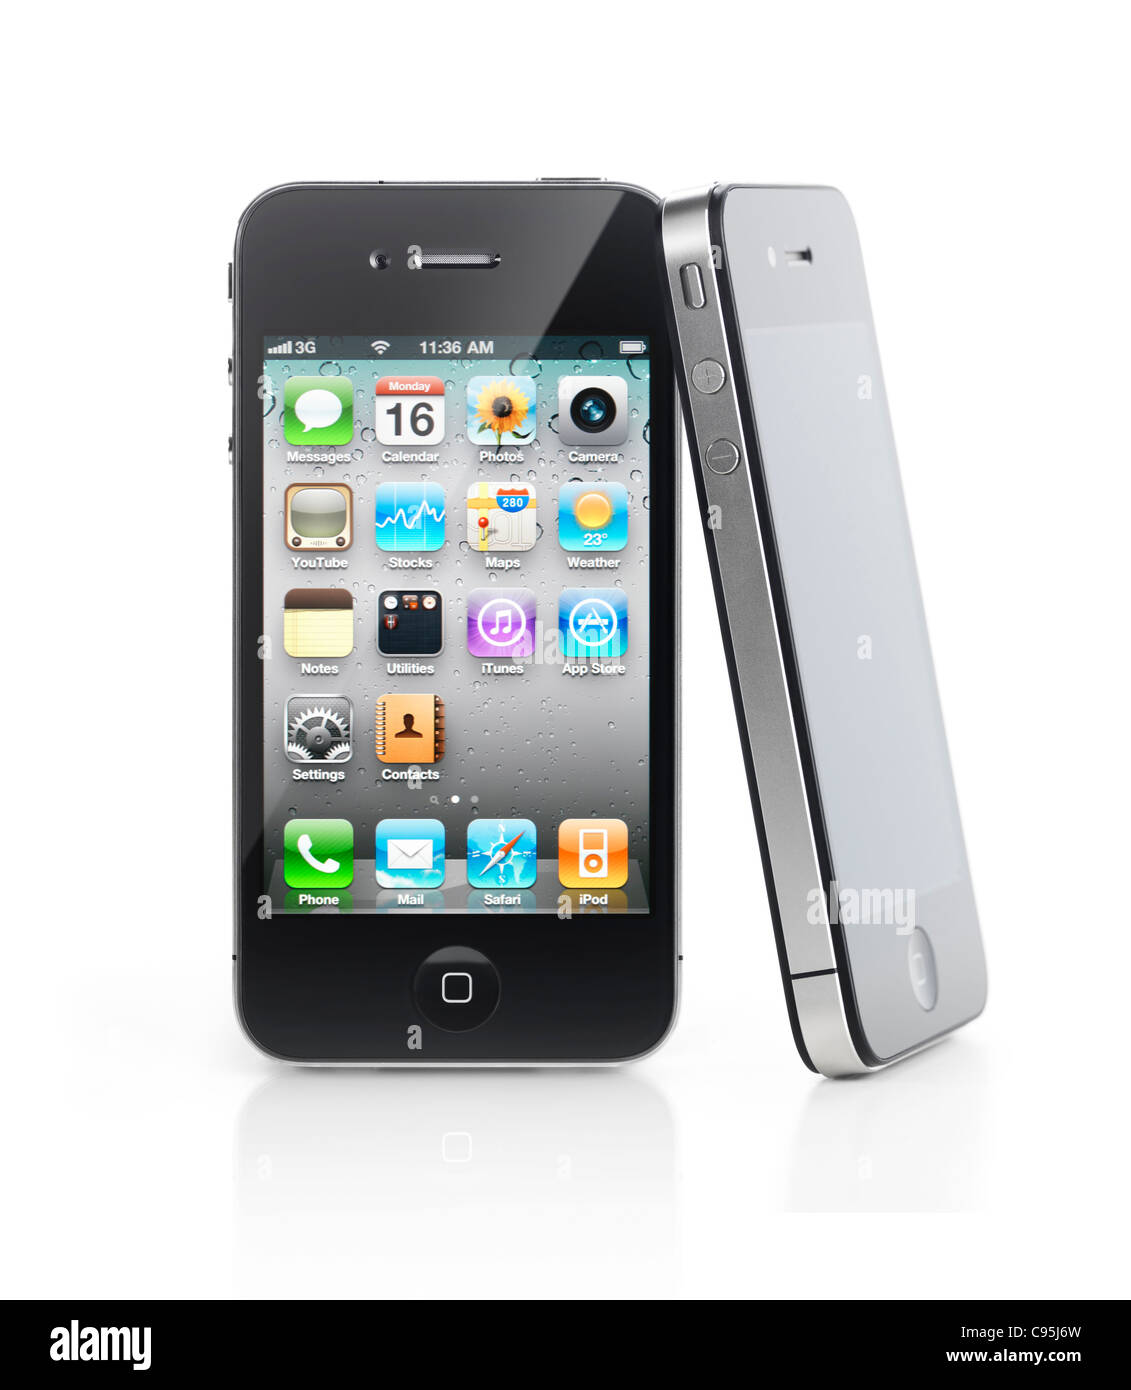 Two Apple iPhone 4 smartphones one leaning against another isolated on white background Stock Photo